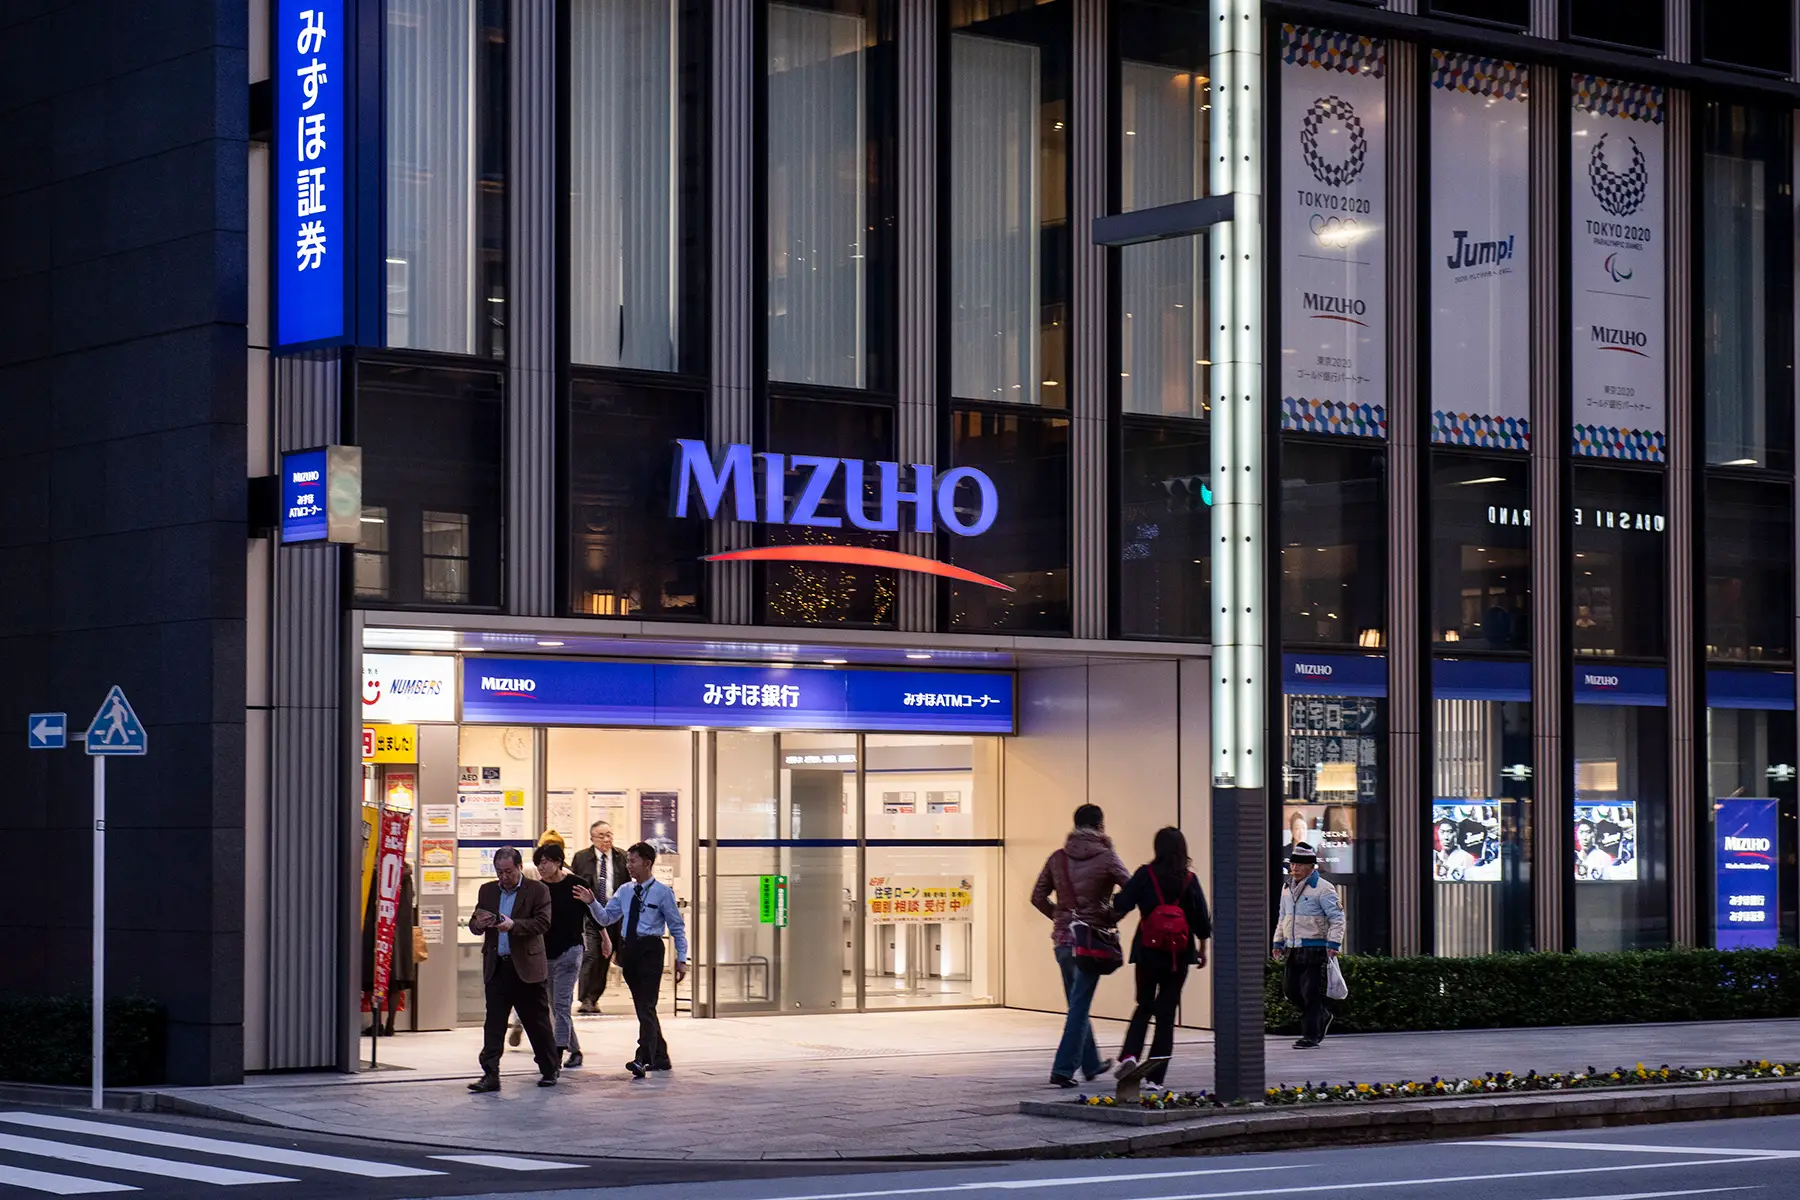 Mizuho bank at night with lights on and people walking past